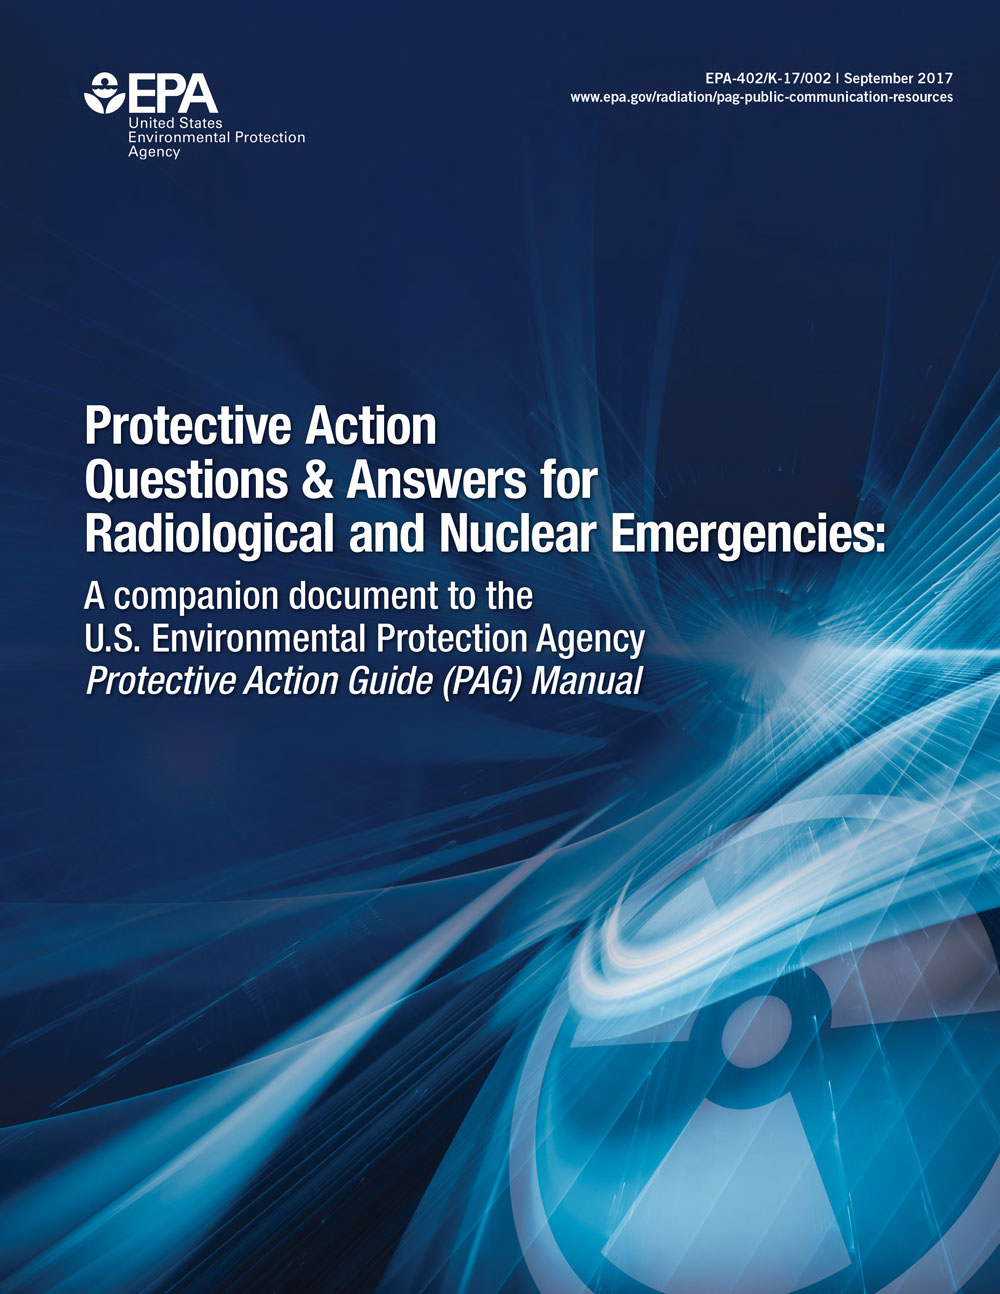 Protective Action Questions & Answers for Radiological and Nuclear Emergencies, report cover